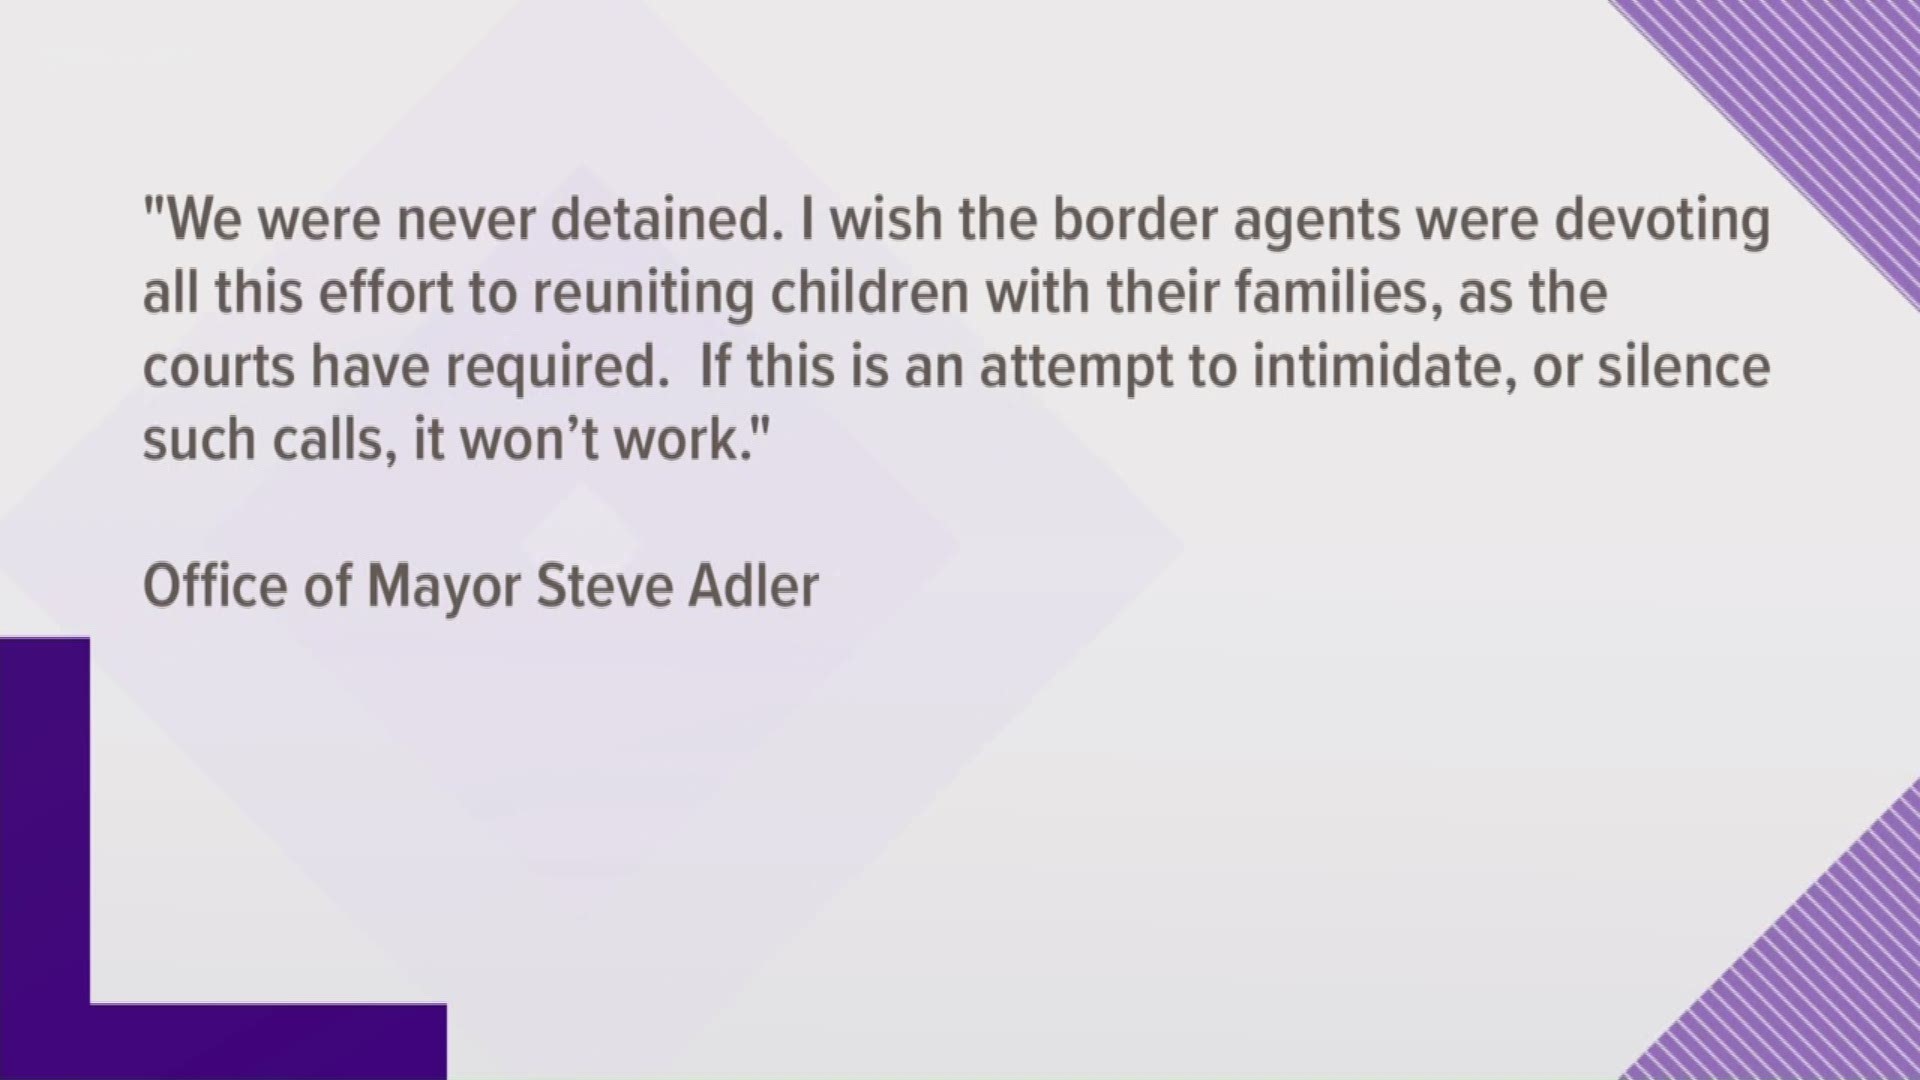 According to Fox News, Mayor Adler violated Mexican and U.S. immigration laws by crossing the border during a visit to El Paso last month.